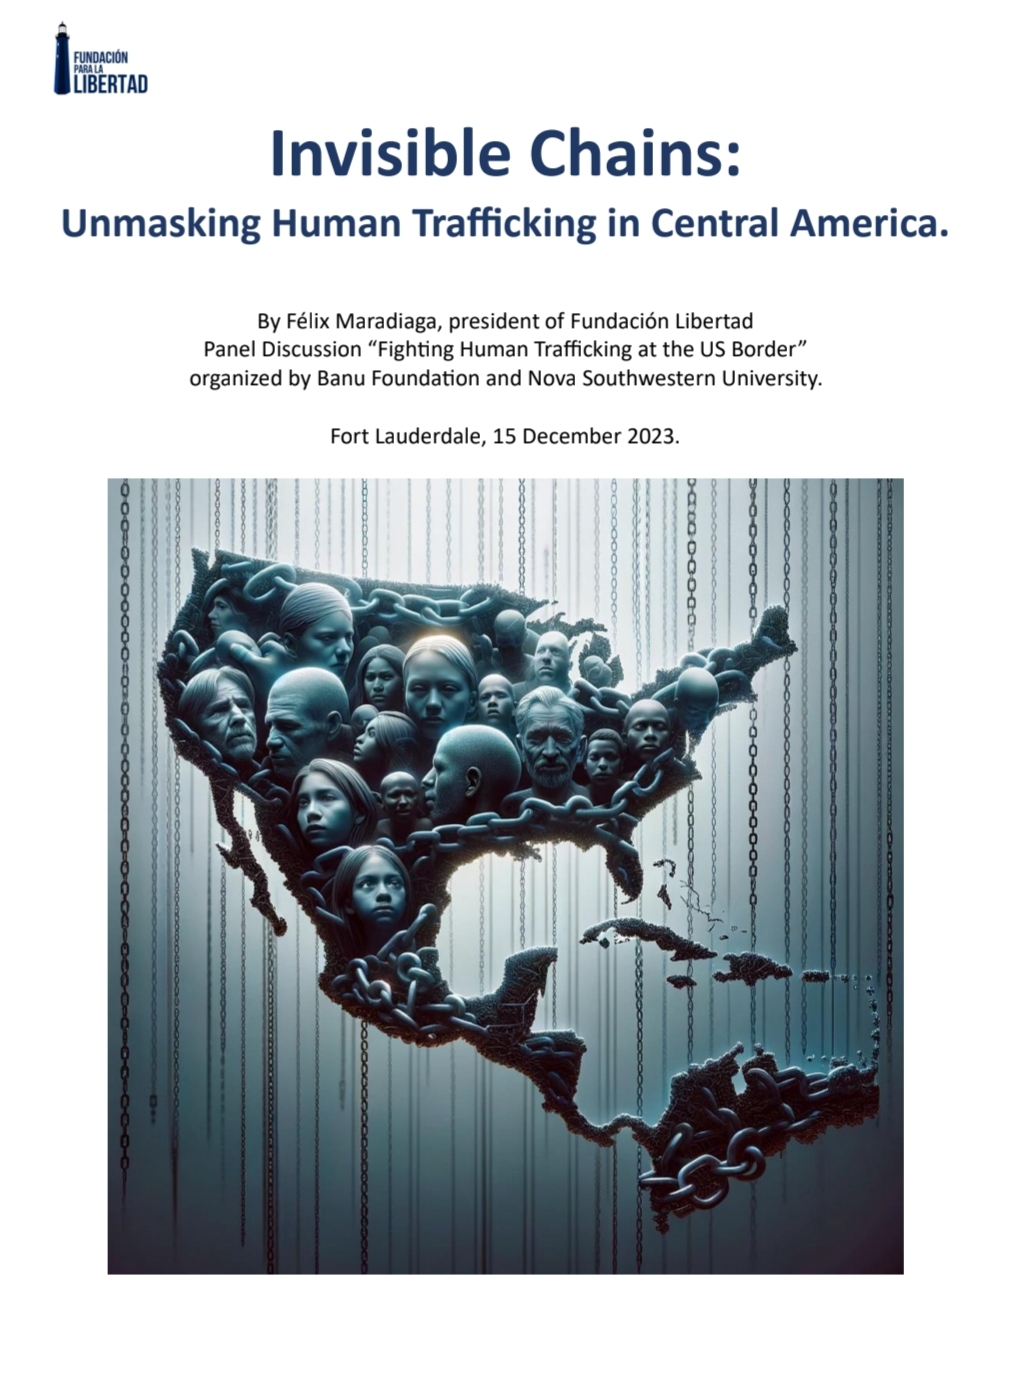 Invisible Chains: unmasking trafficking in central america 